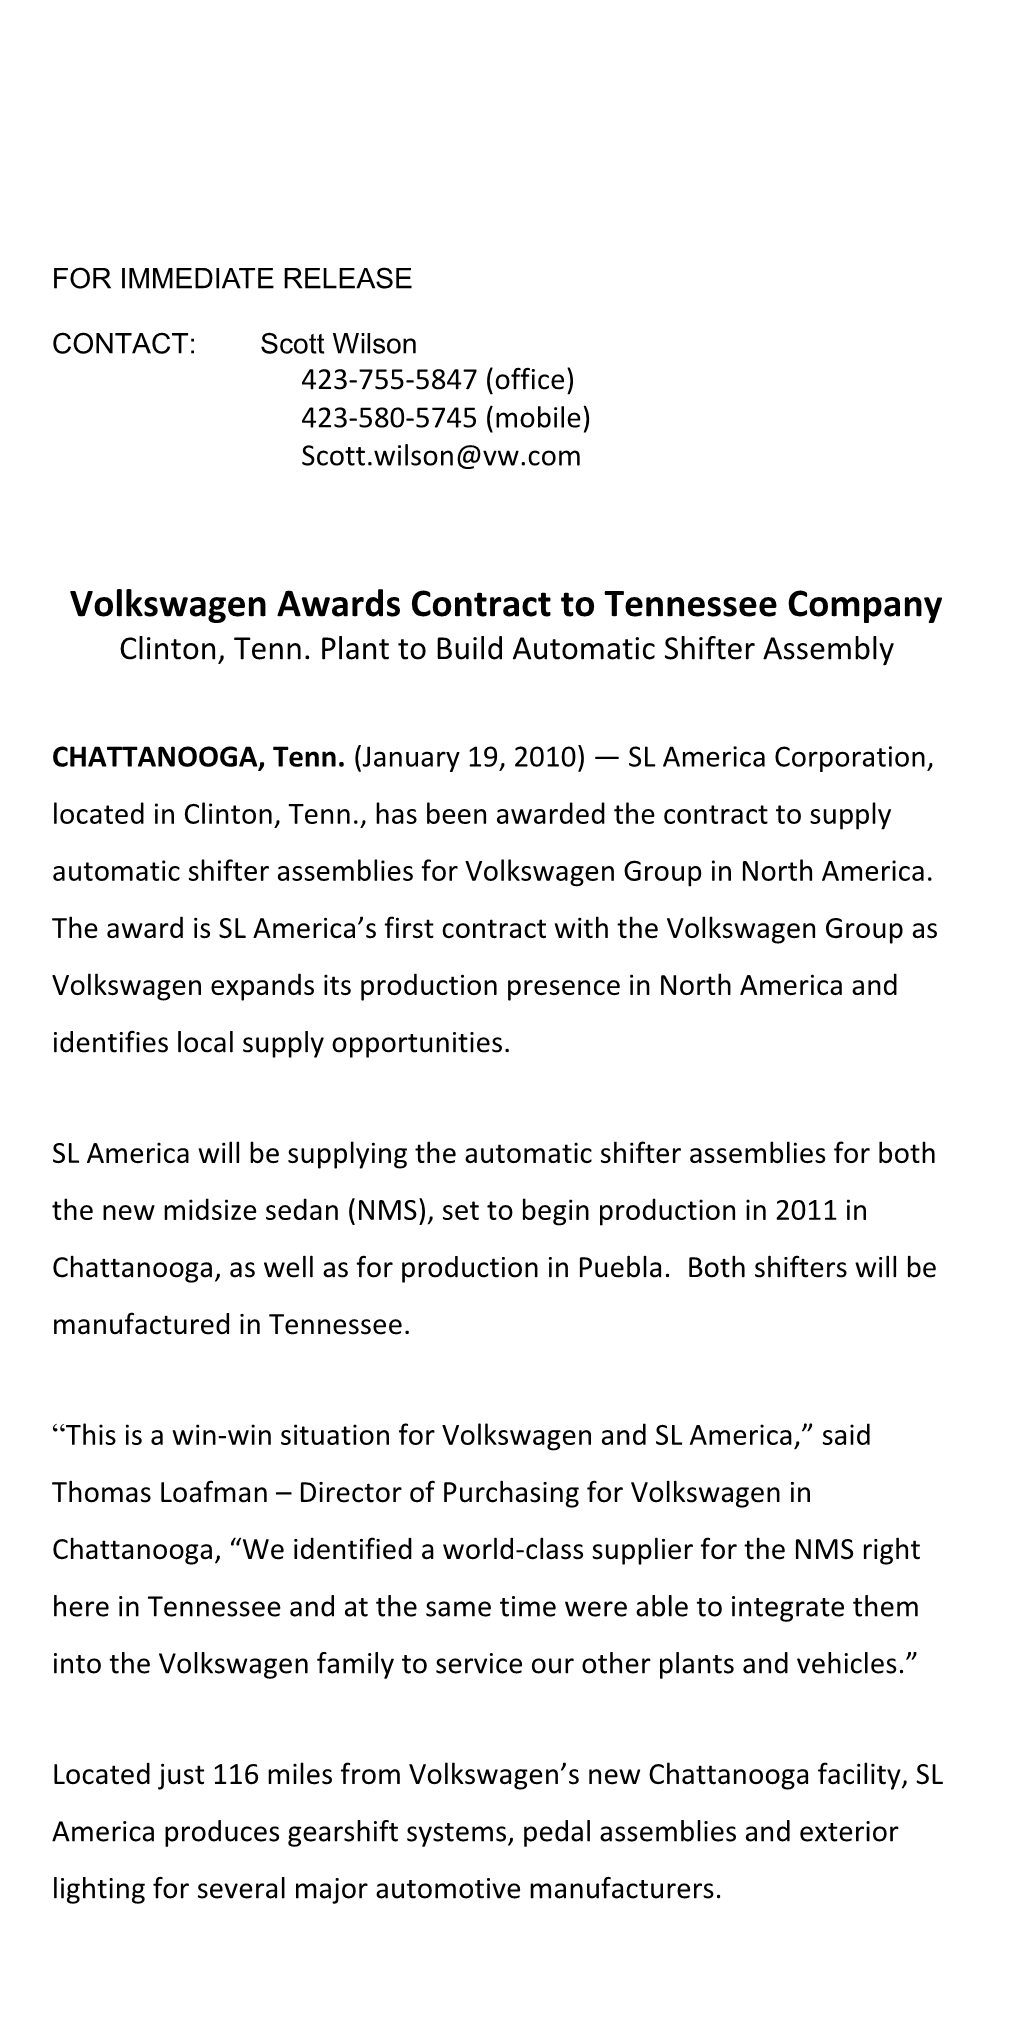 Volkswagen Awards Contract to Tennessee Company